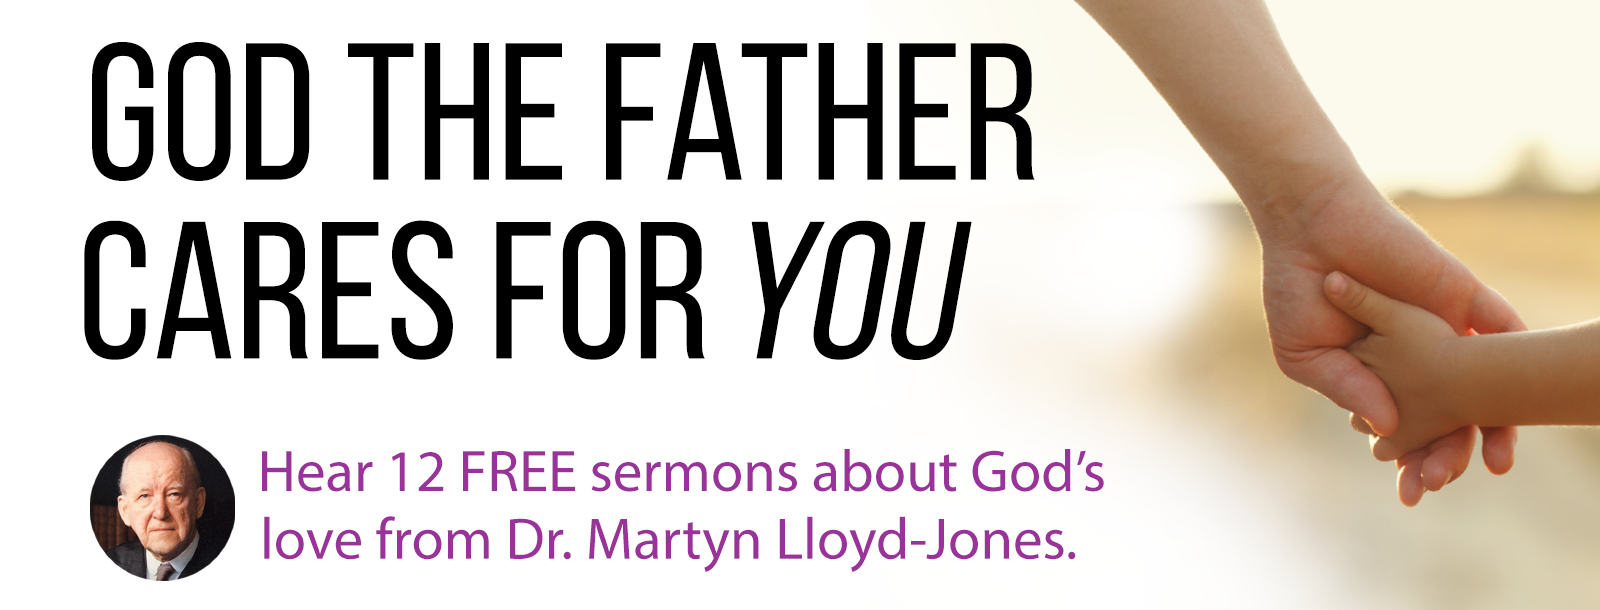 God the Father Cares for You - Hear 12 FREE sermons about God's love from Dr. Martyn Lloyd-Jones